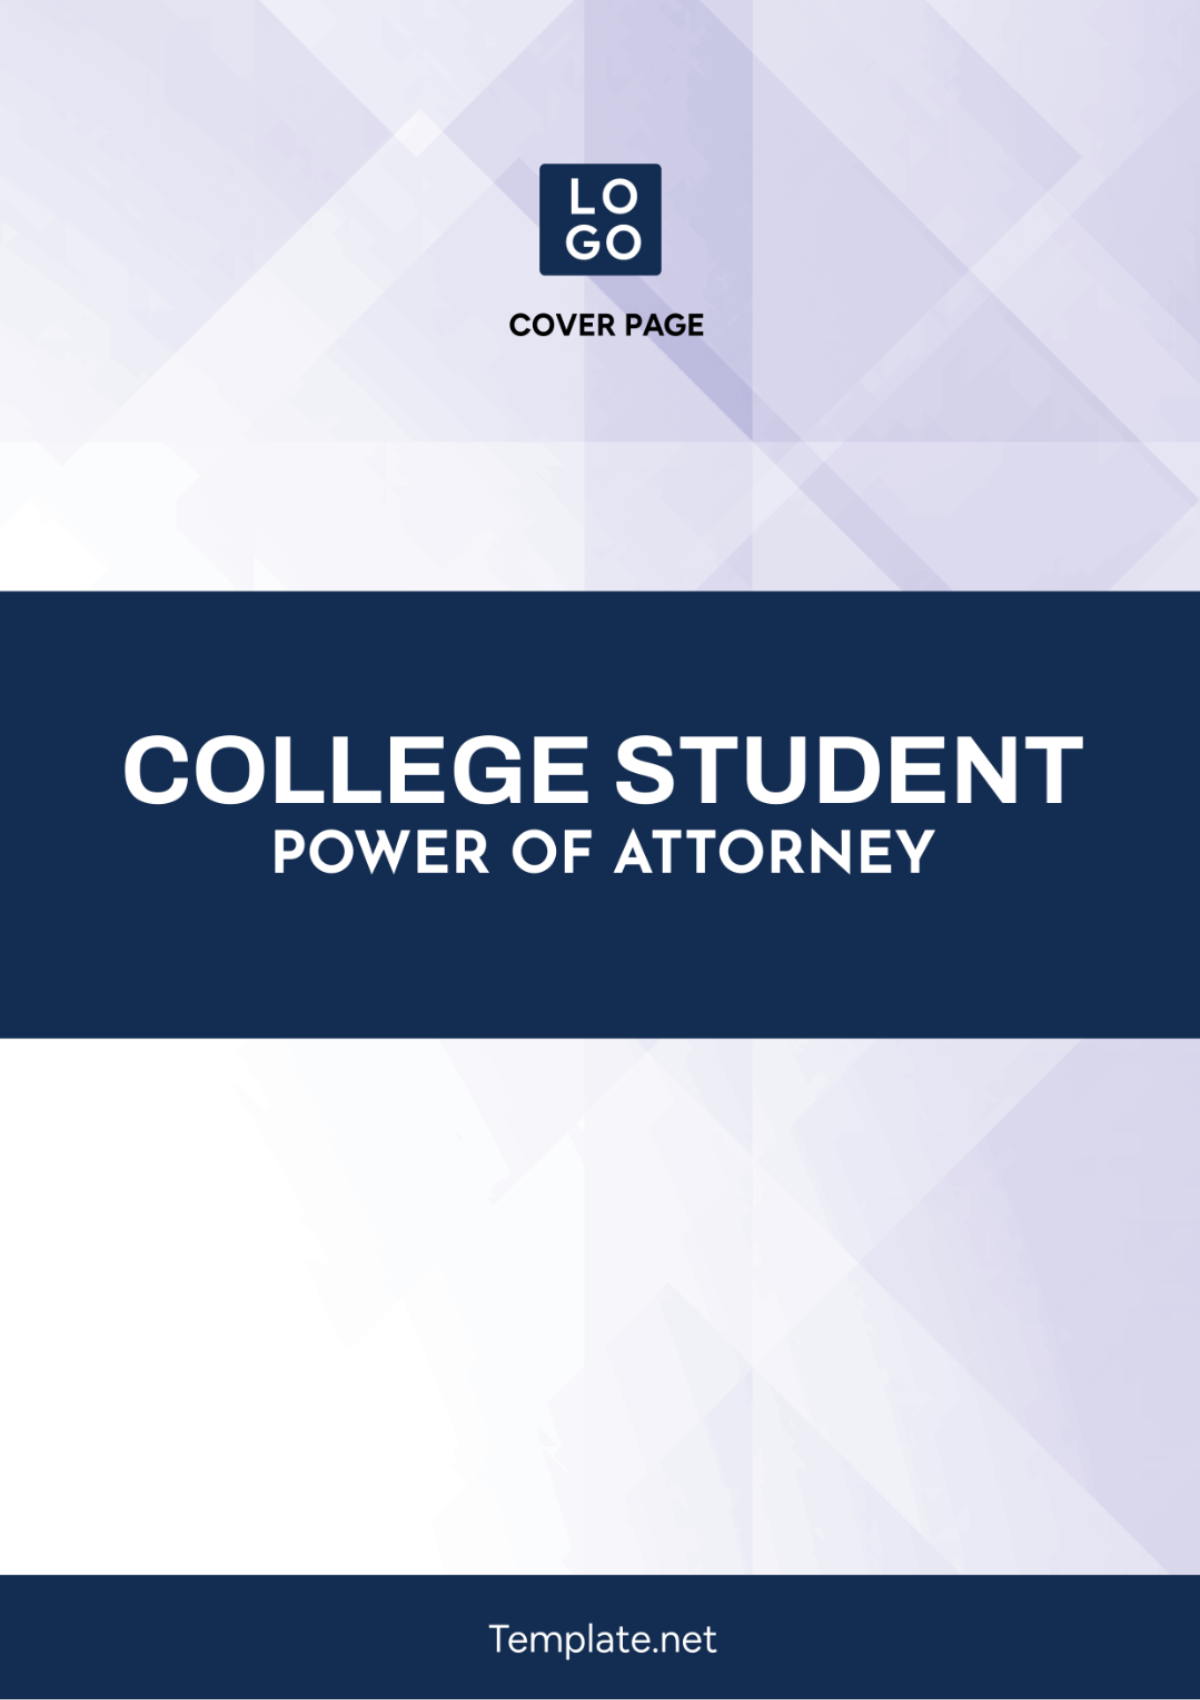 College Student Power of Attorney Template